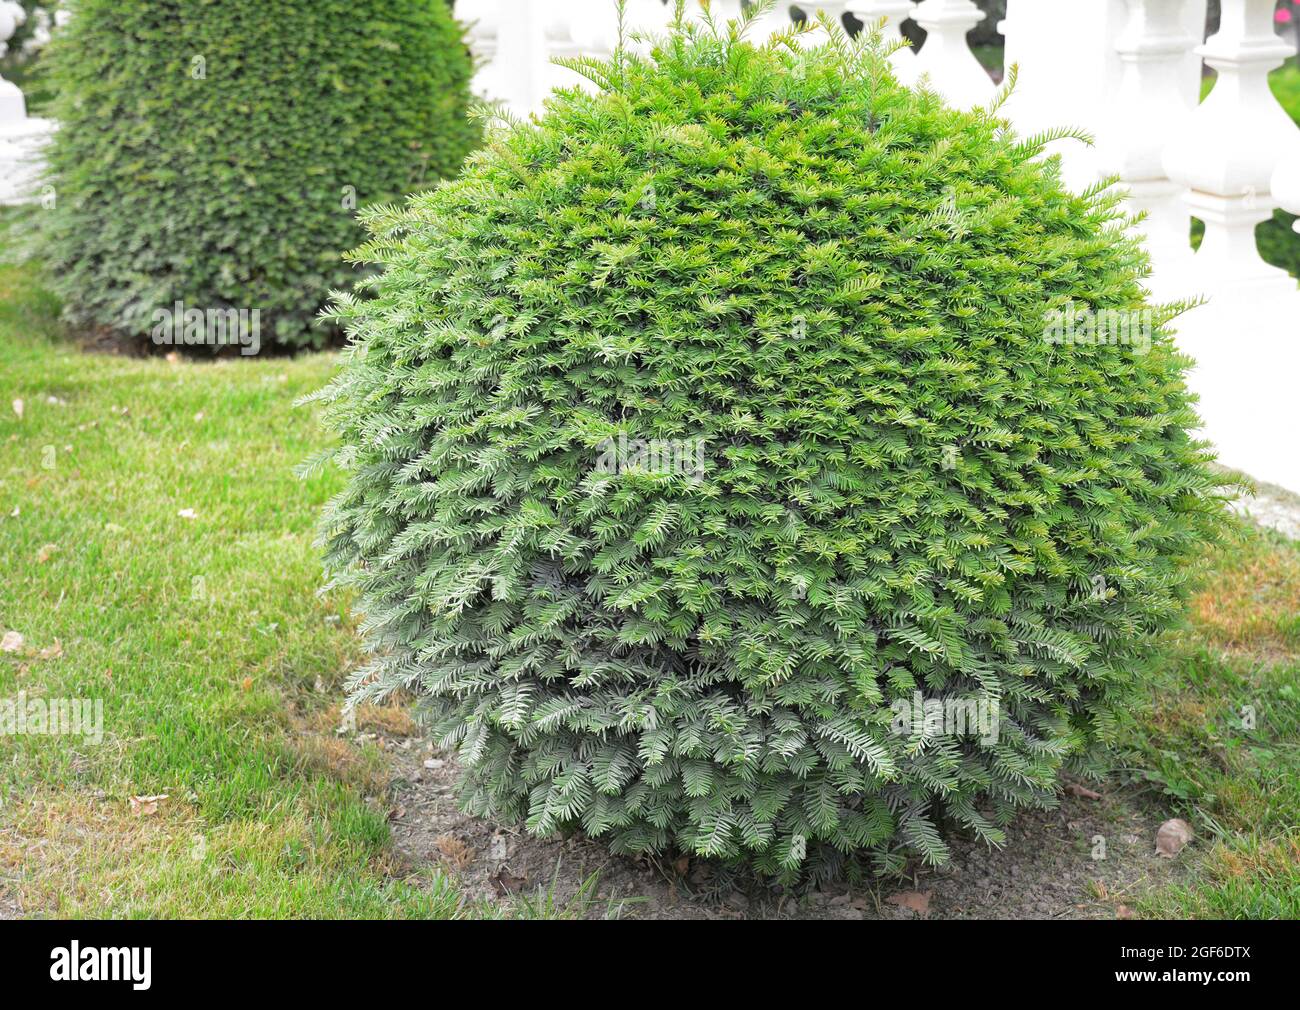 Ball-shaped English yew tree or European yew. Taxus baccata topiary ball growing in a lawn. Stock Photo